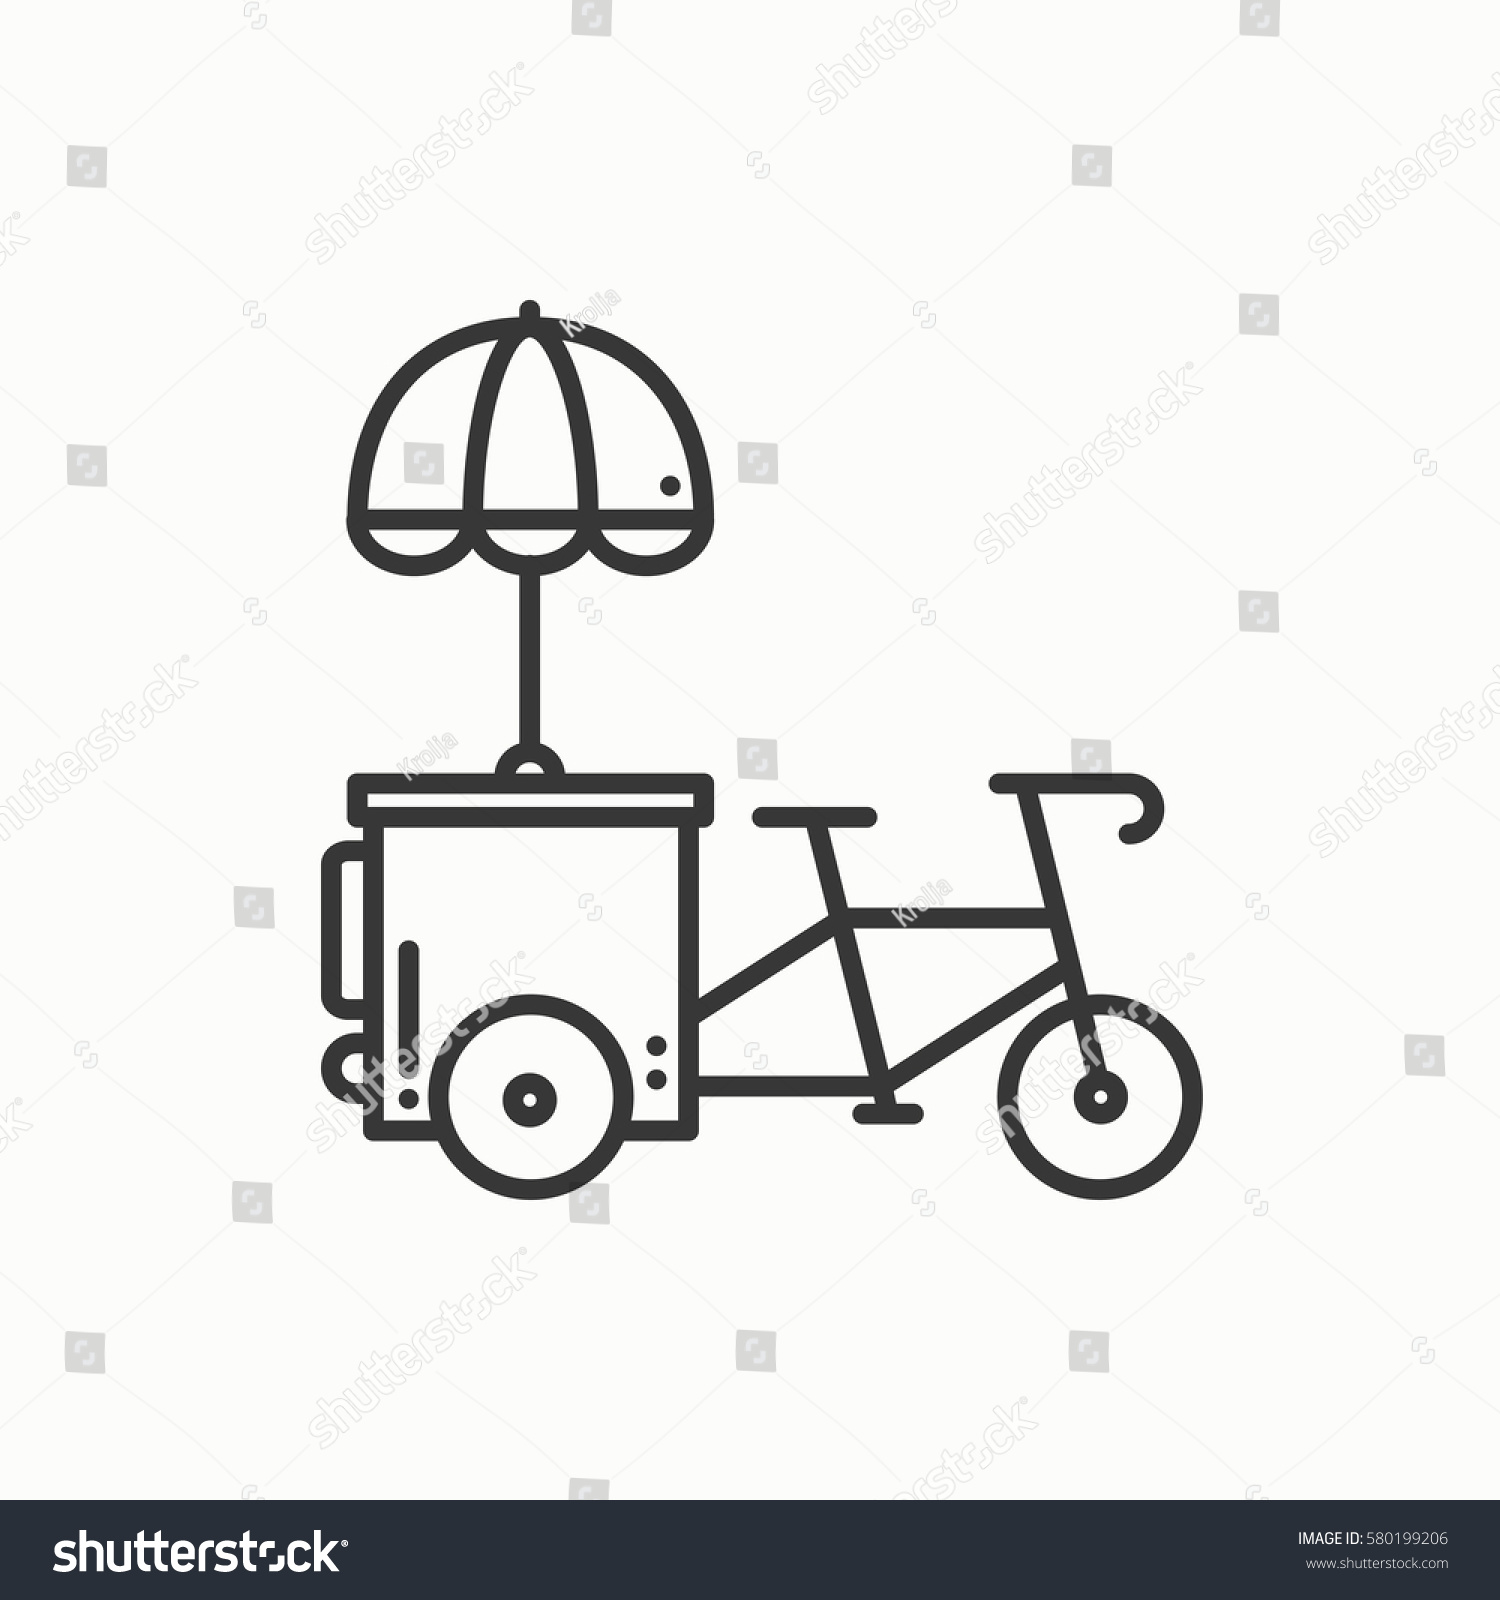 SVG of Street food retail thin line icon. Tricycle trade cart. Fast food trolley bike, bicycle. Wheel shop, cafe, mobile kiosk, stall. Vector style linear icon. Isolated flat illustration. Symbols. Black svg